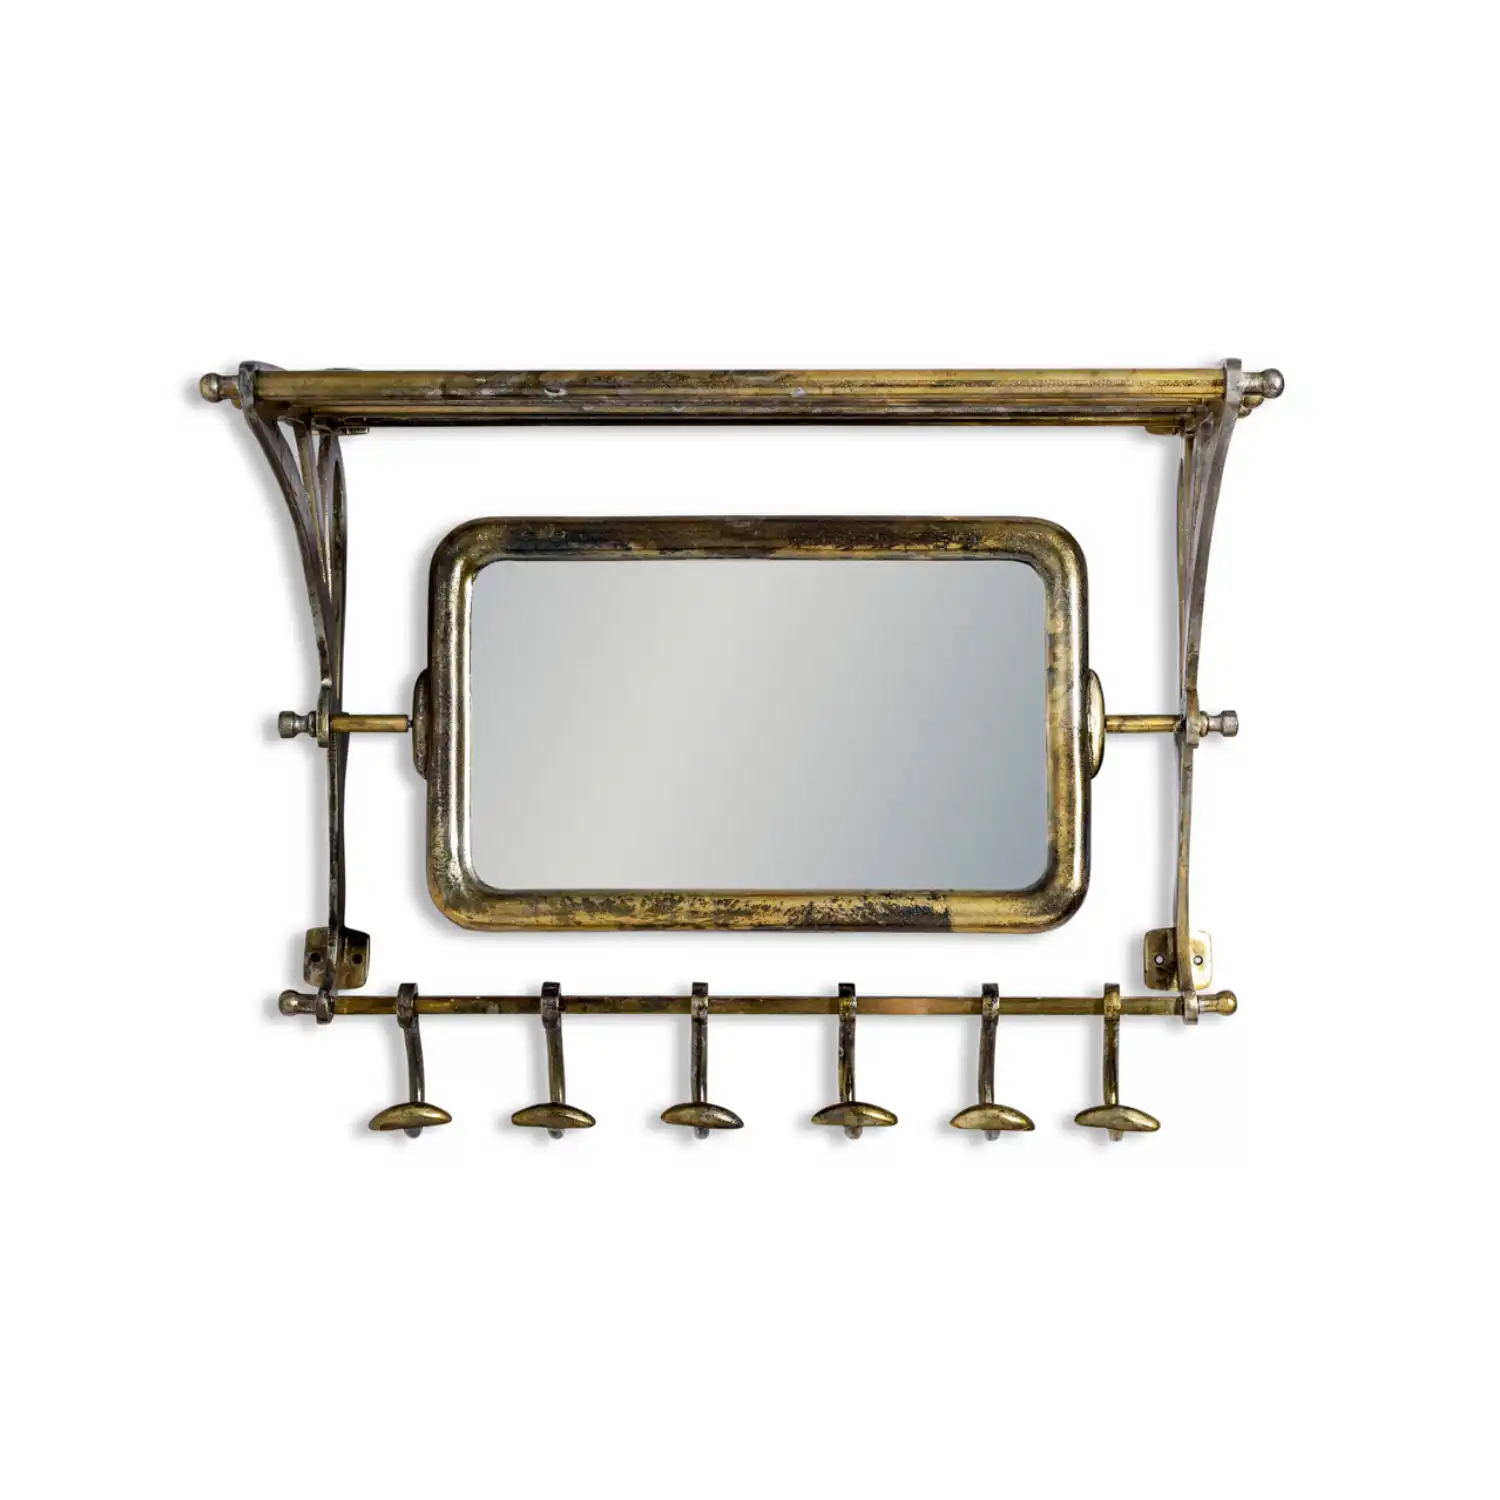 Gold Metal Luggage Wall Rack with Mirror and Hooks